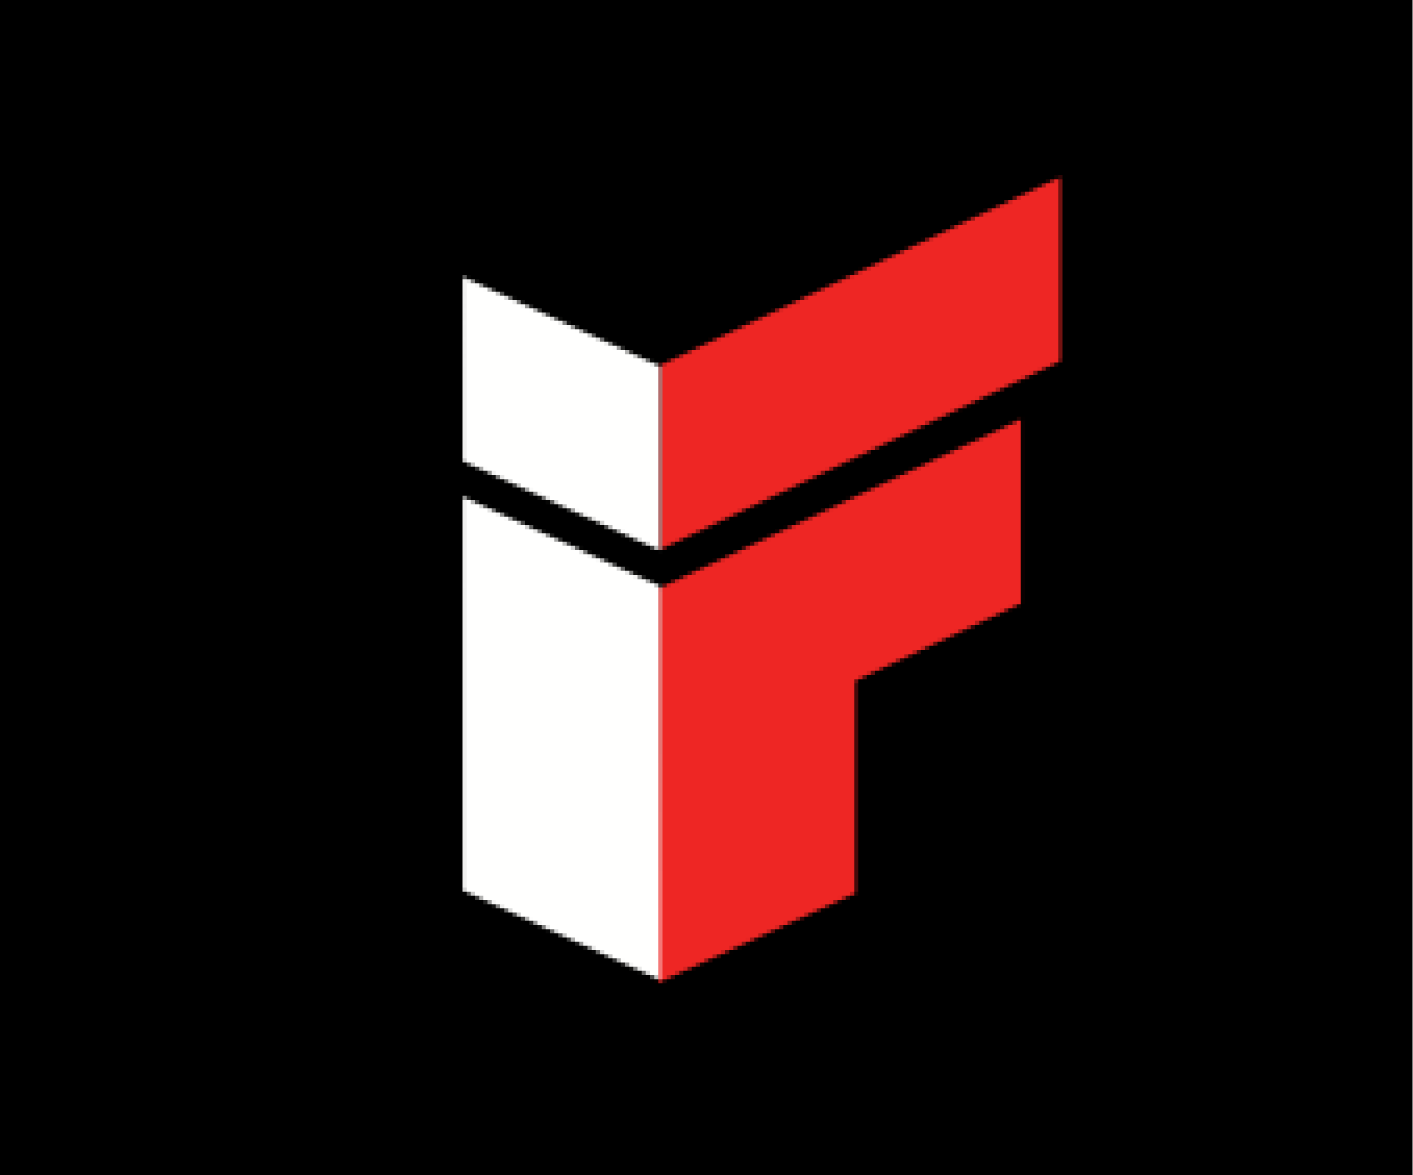 Red and Black If Logo - Logos.F.Howes Ltd